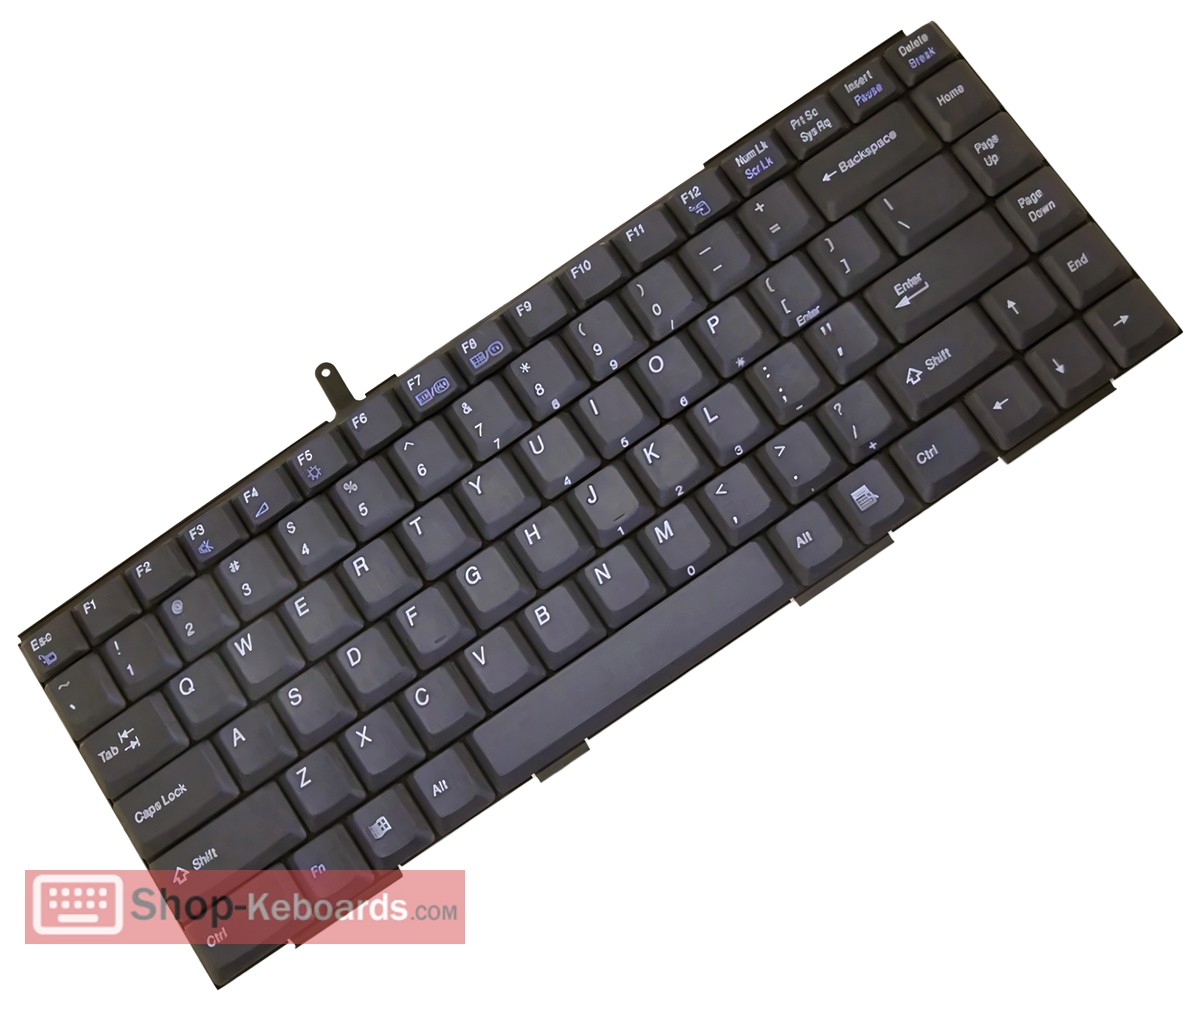 Sony VAIO PCG-F660T Keyboard replacement